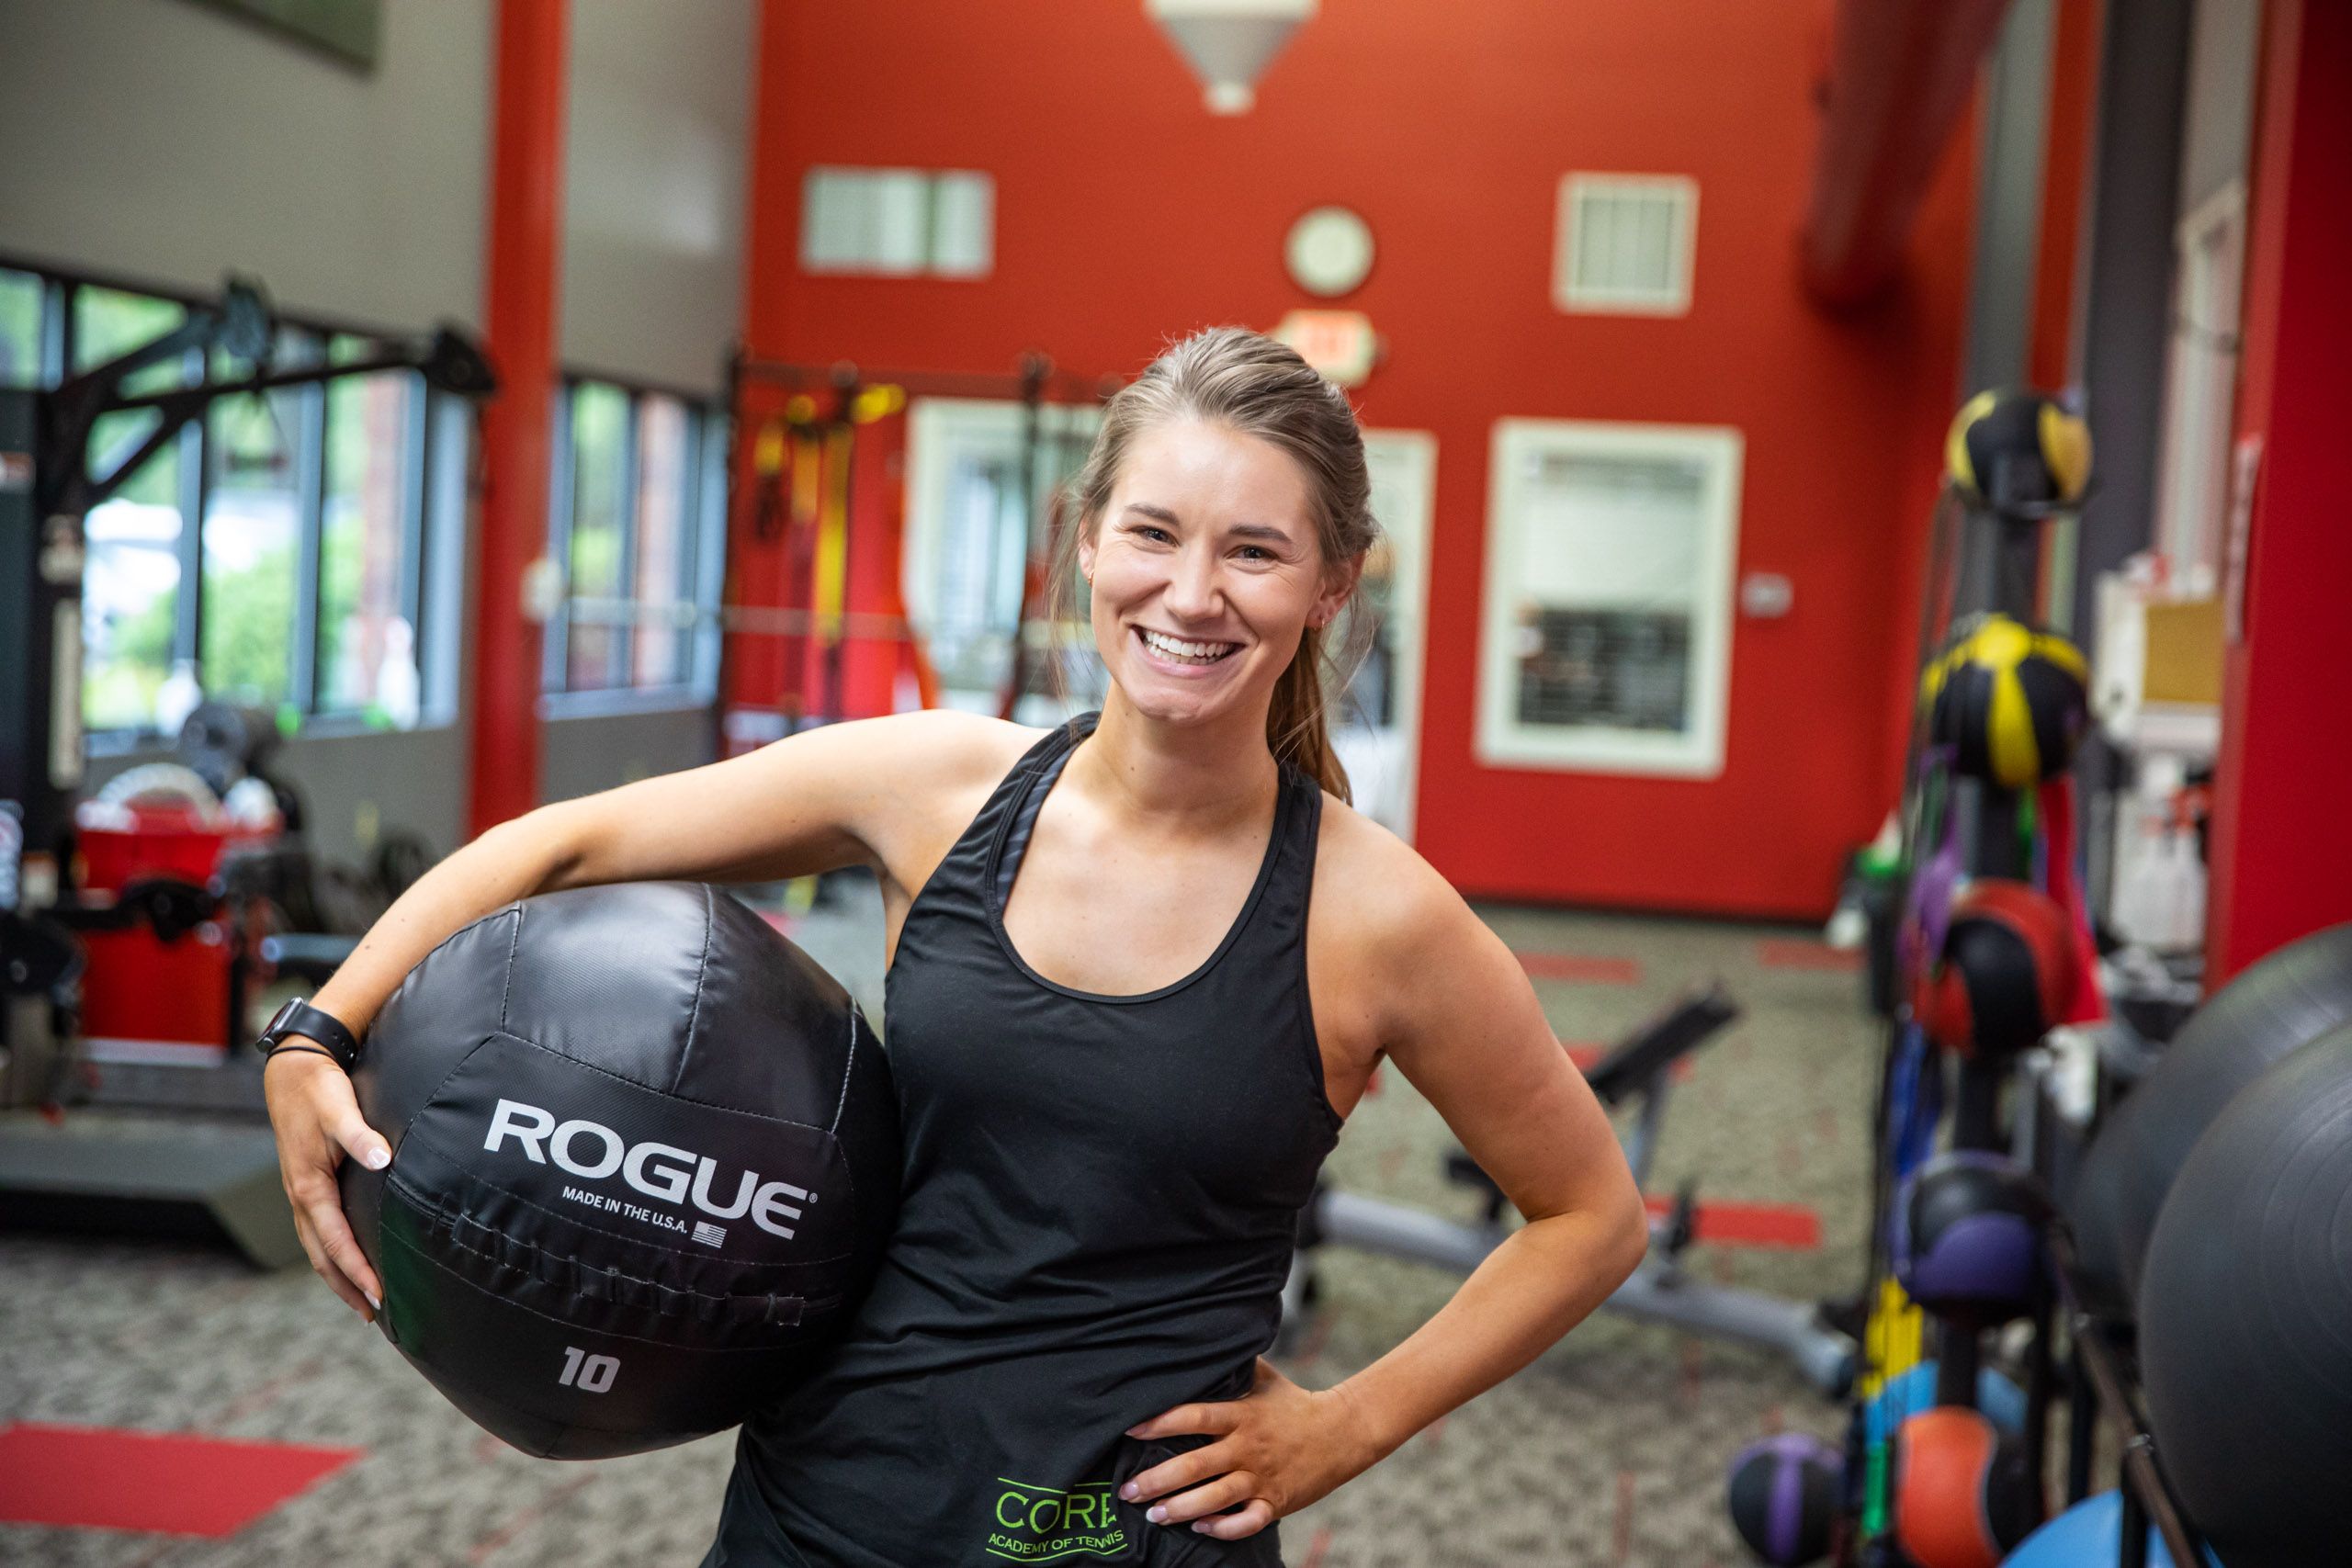 Woman Smiling with Medicine Ball